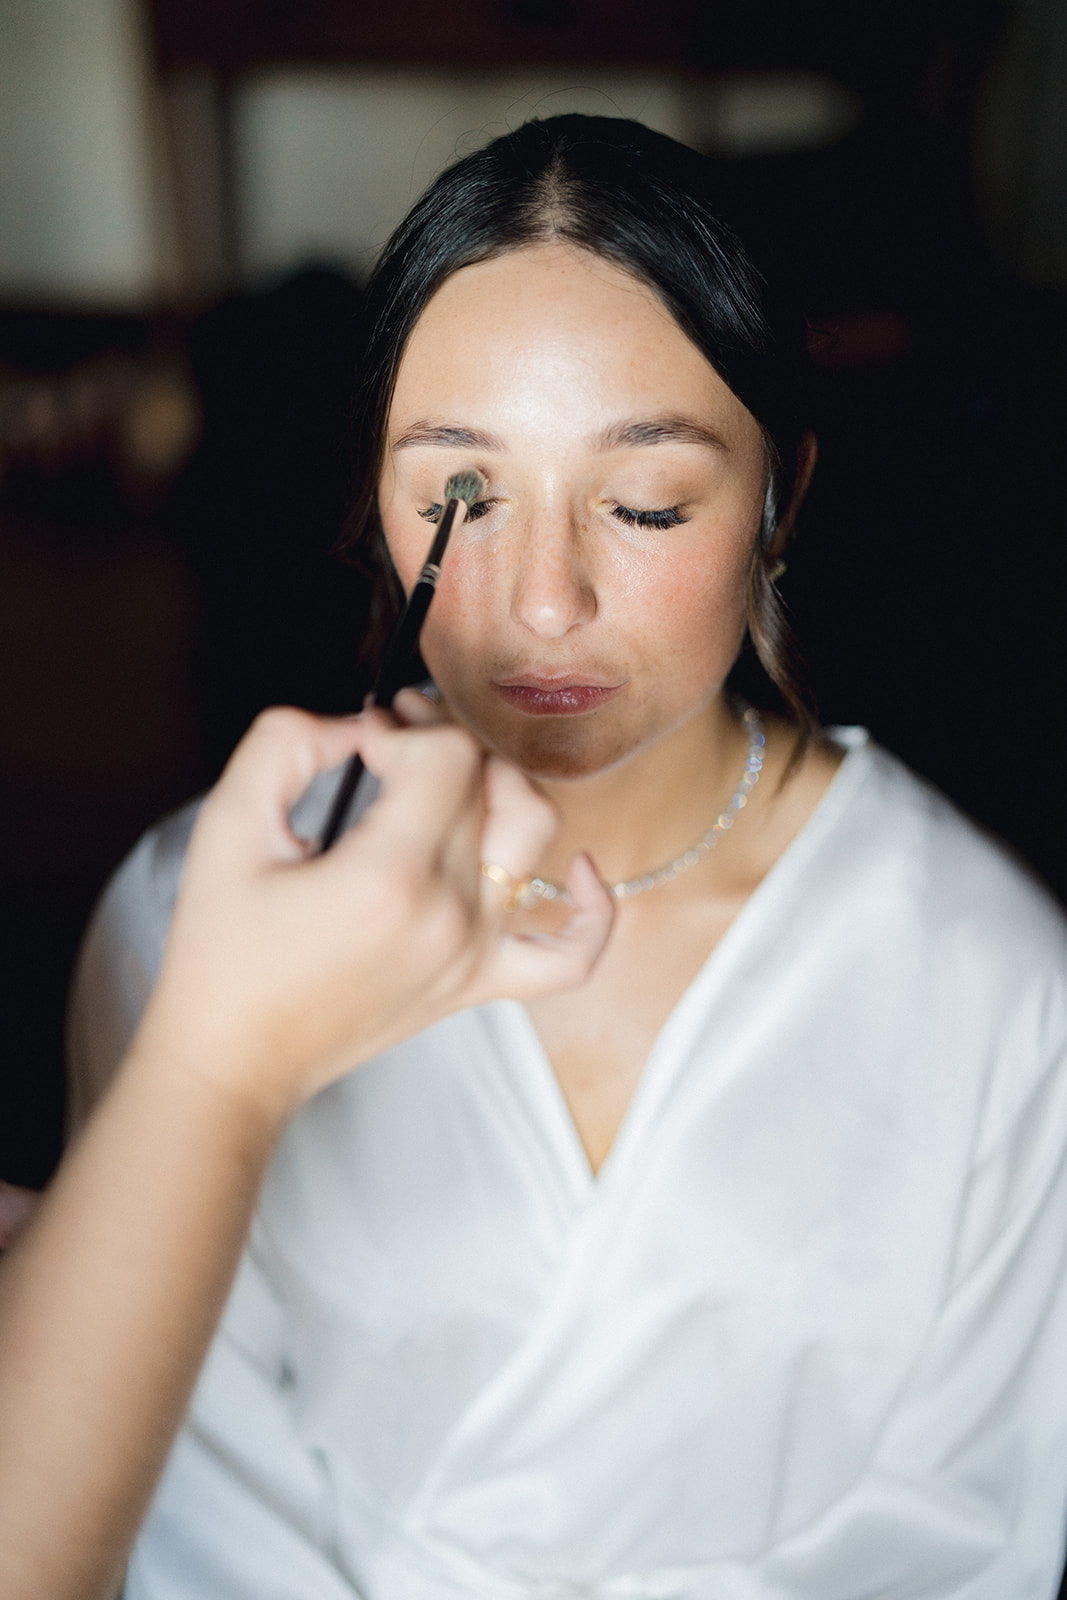 The beginning of the bride's eye makeup